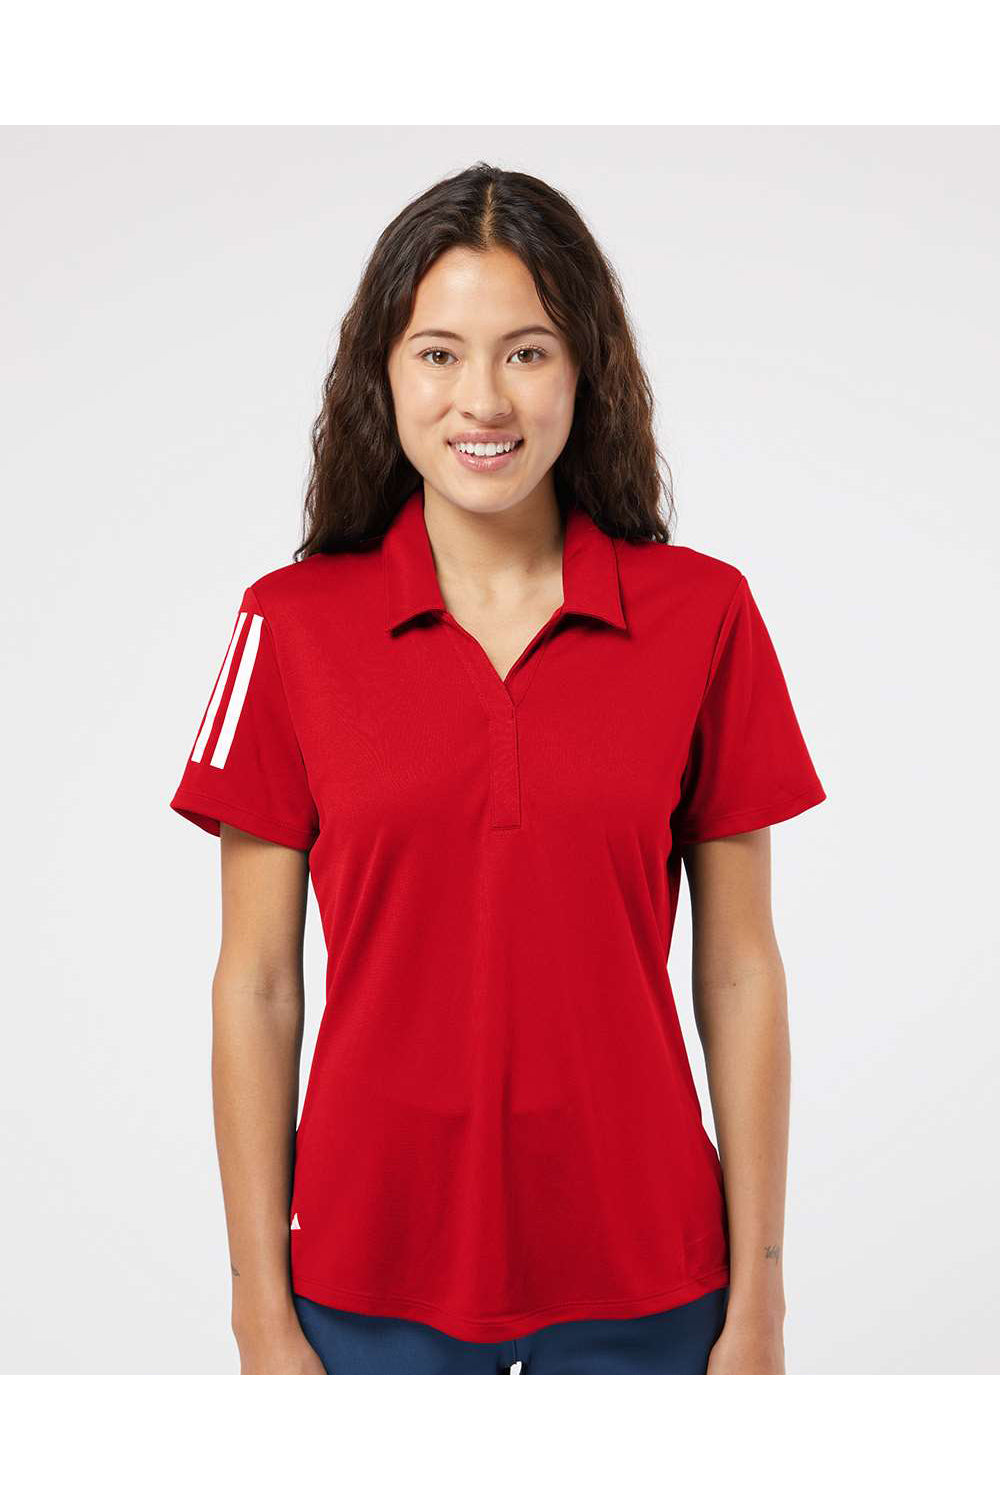 Adidas A481 Womens Floating 3 Stripes Polo Shirt Team Power Red/White Model Front